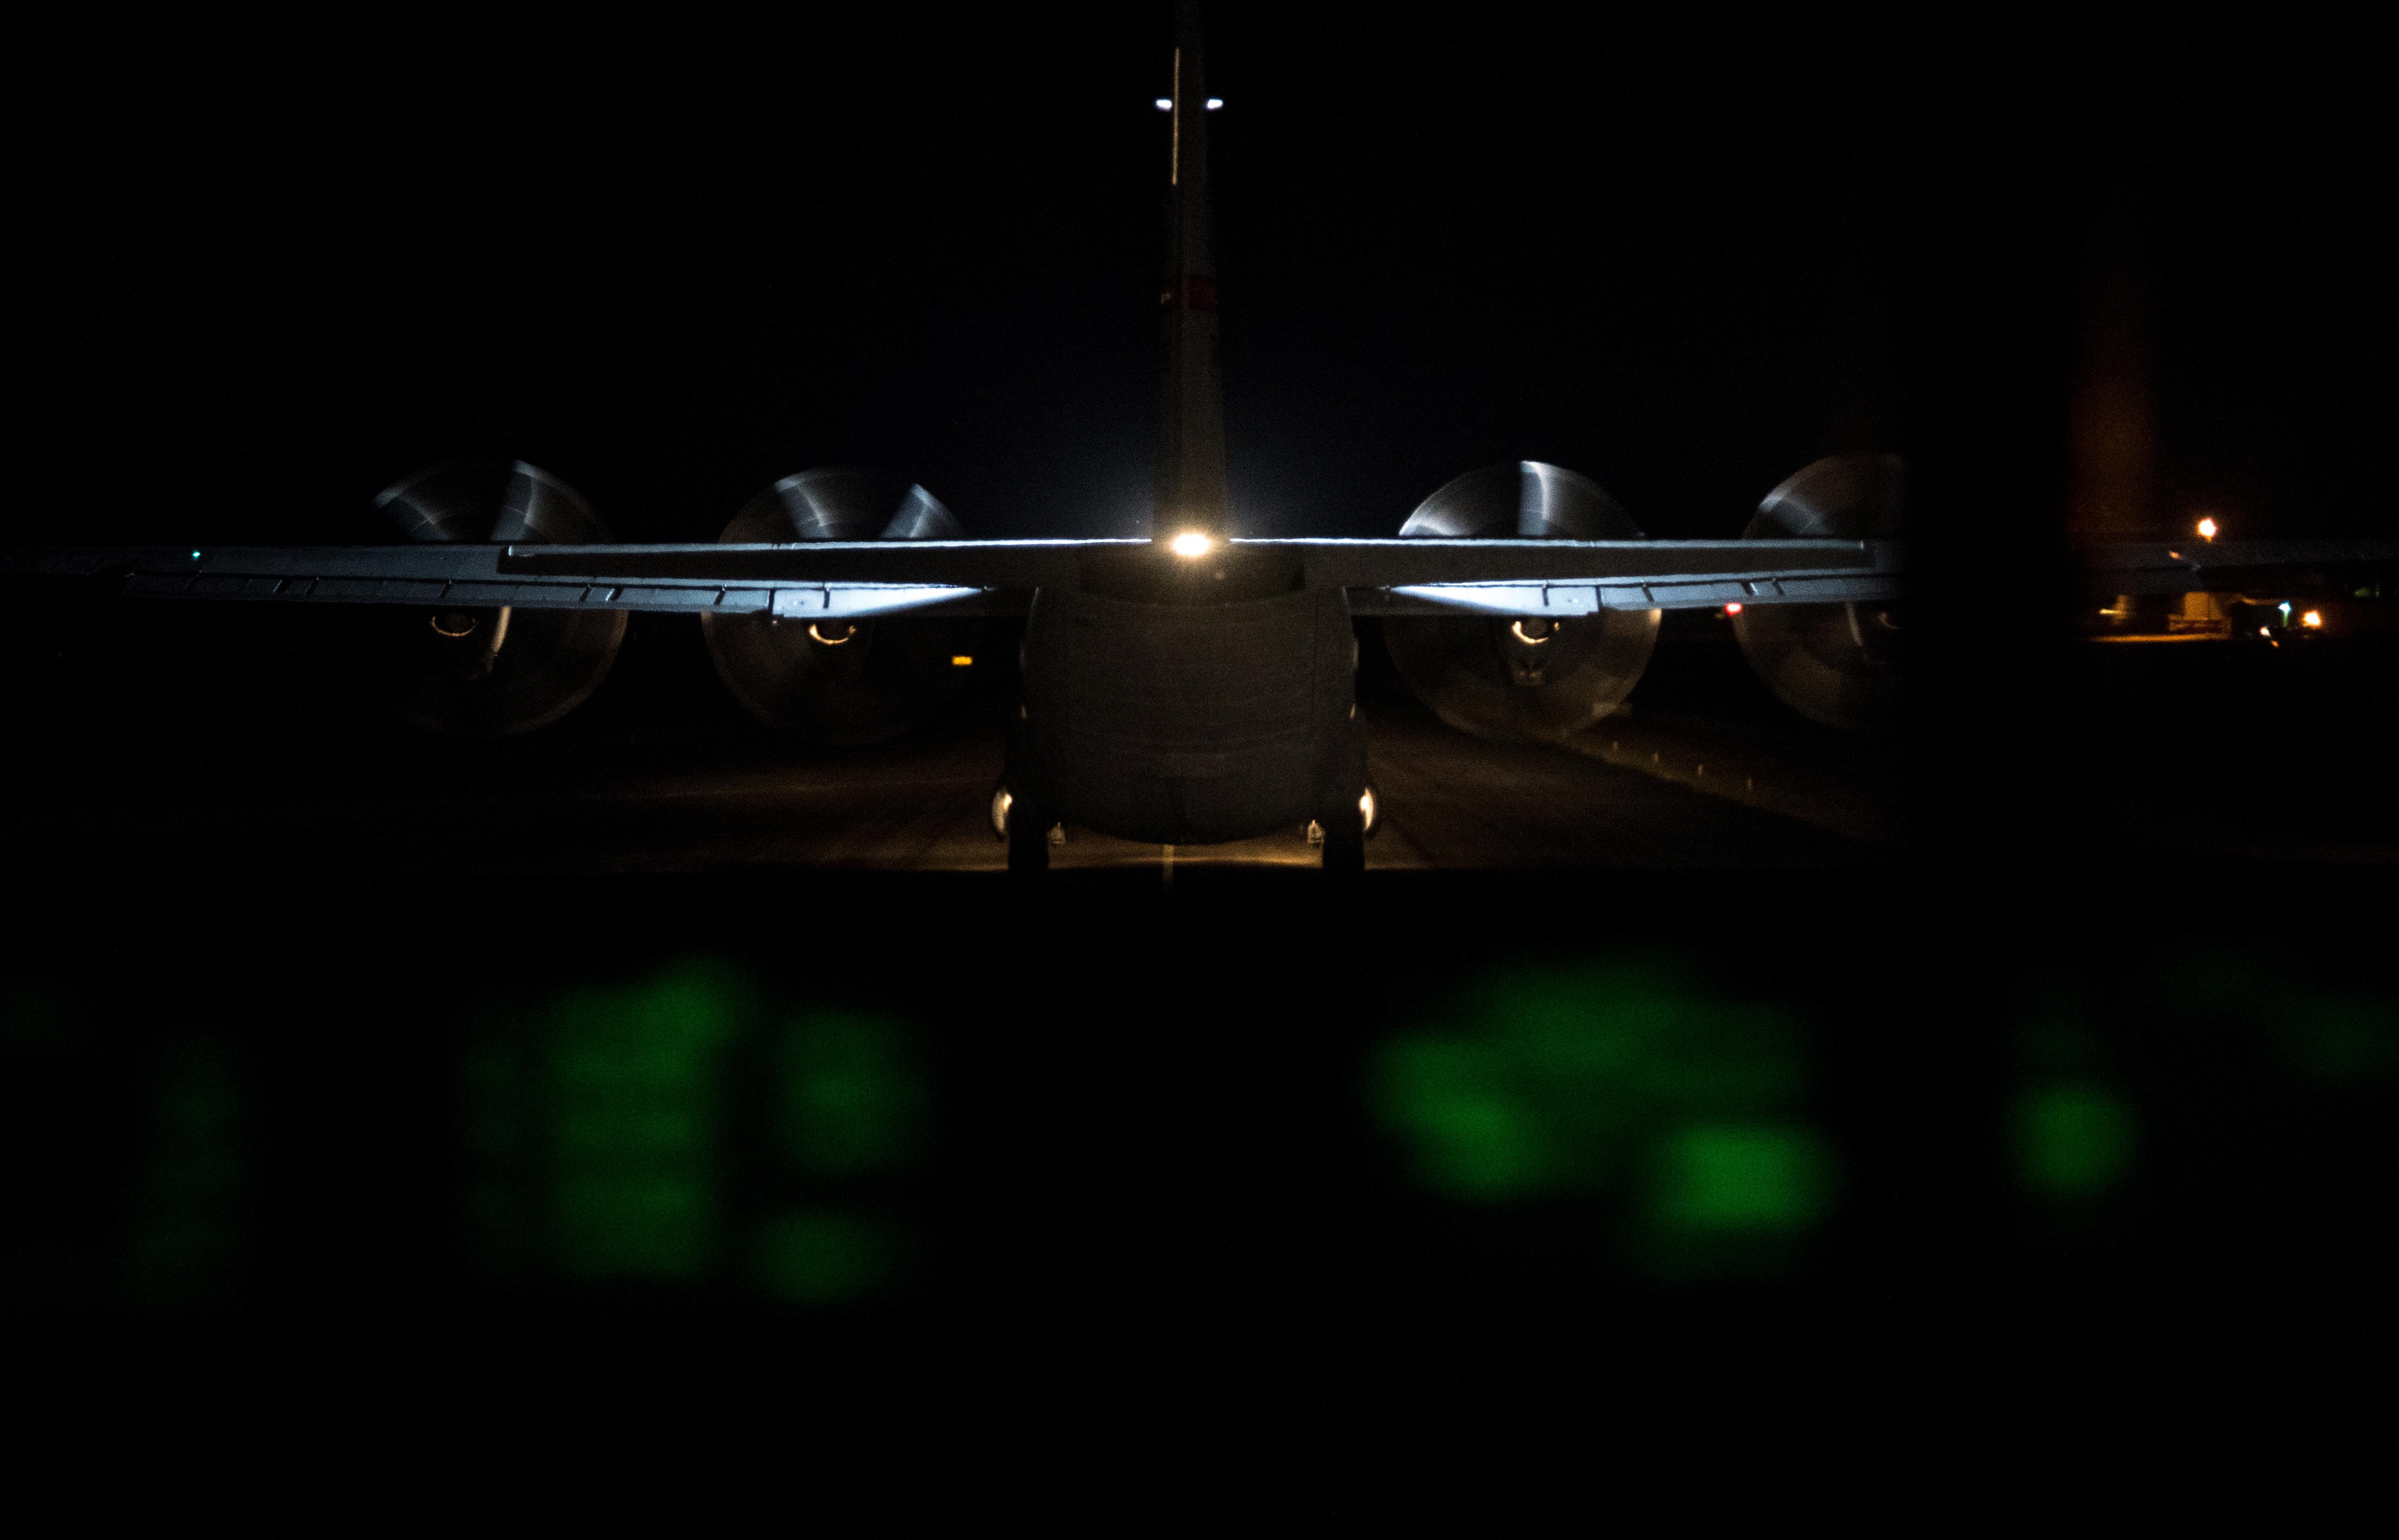 An 815th Airlift Squadron aircrew lands a C-130J Super Hercules aircraft at Keesler Air Force Base, Mississippi,  Nov. 3, 2017. The flight marked the squadron's return to a full operational capability status meaning they are ready to deploy and conduct the combat airlift mission. (U.S. Air Force photo by Staff Sgt. Shelton Sherrill)